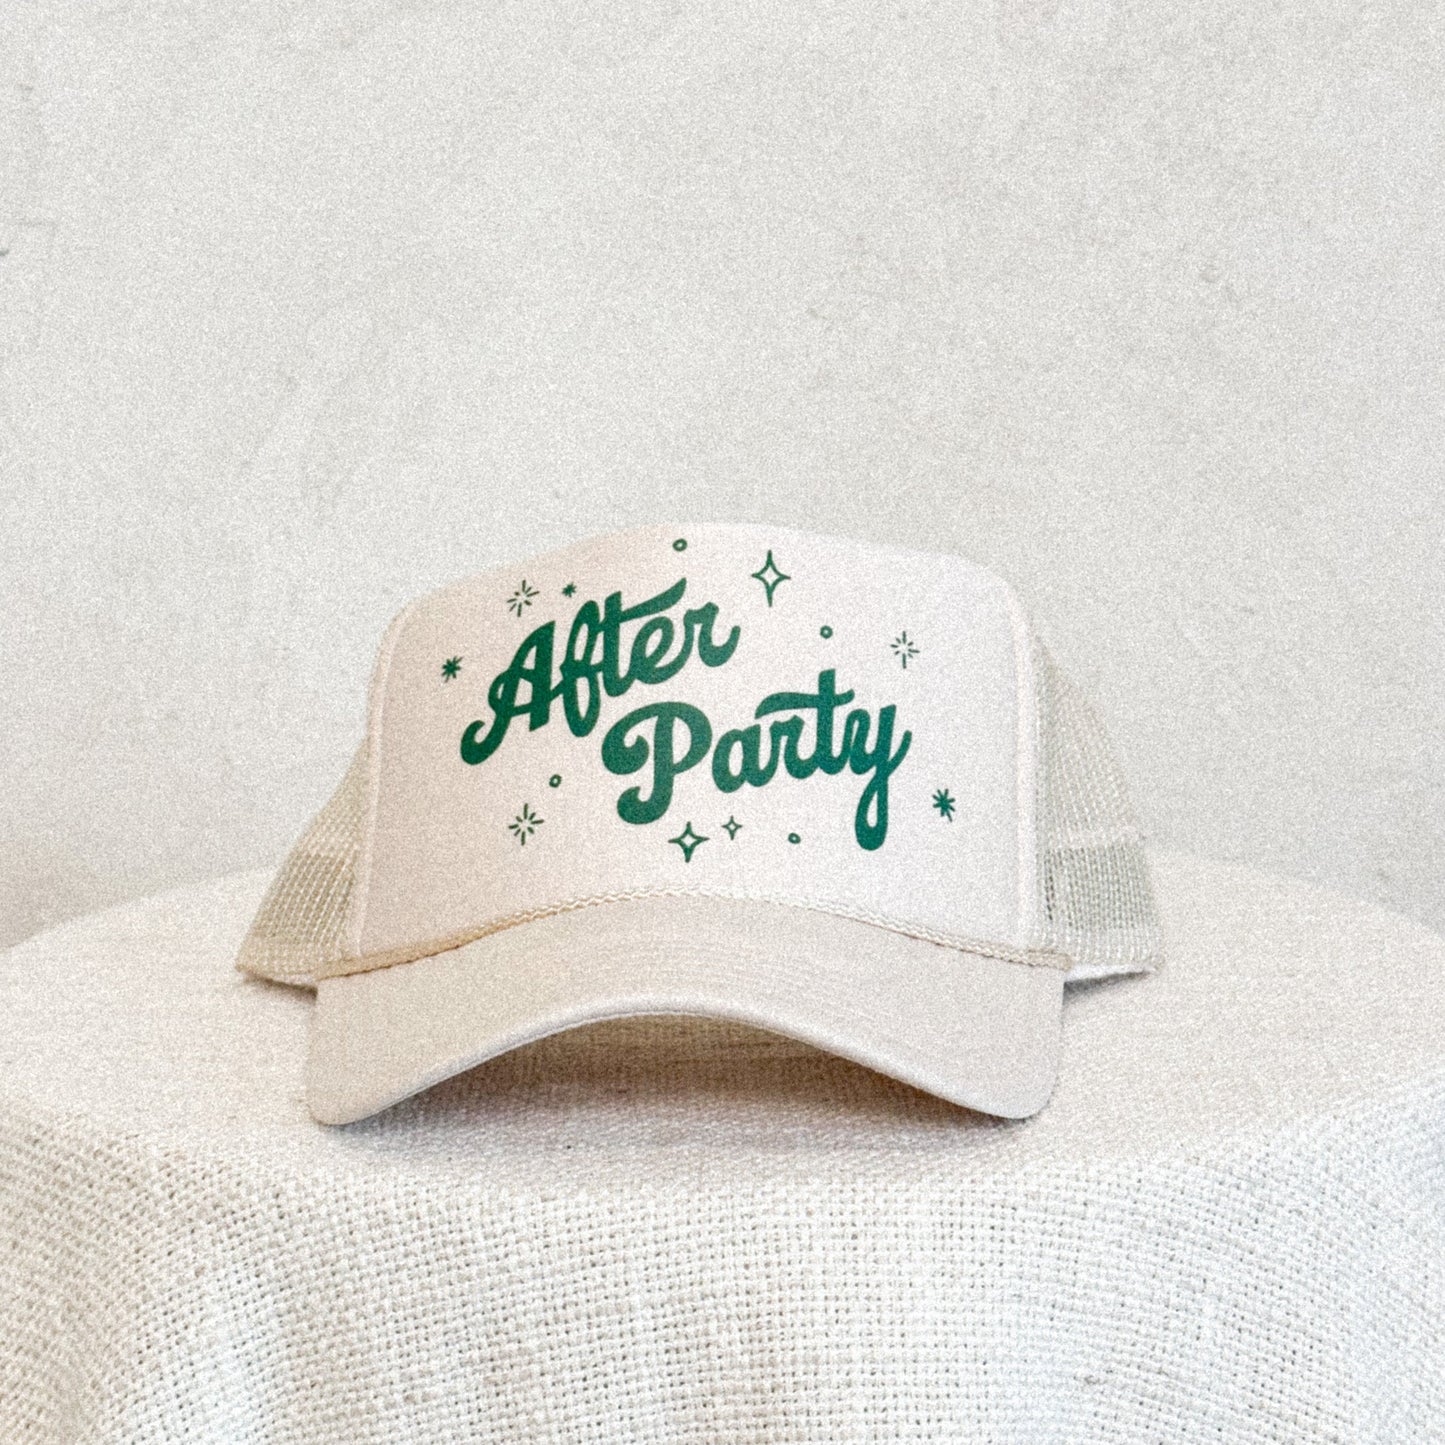 After Party Trucker Hat